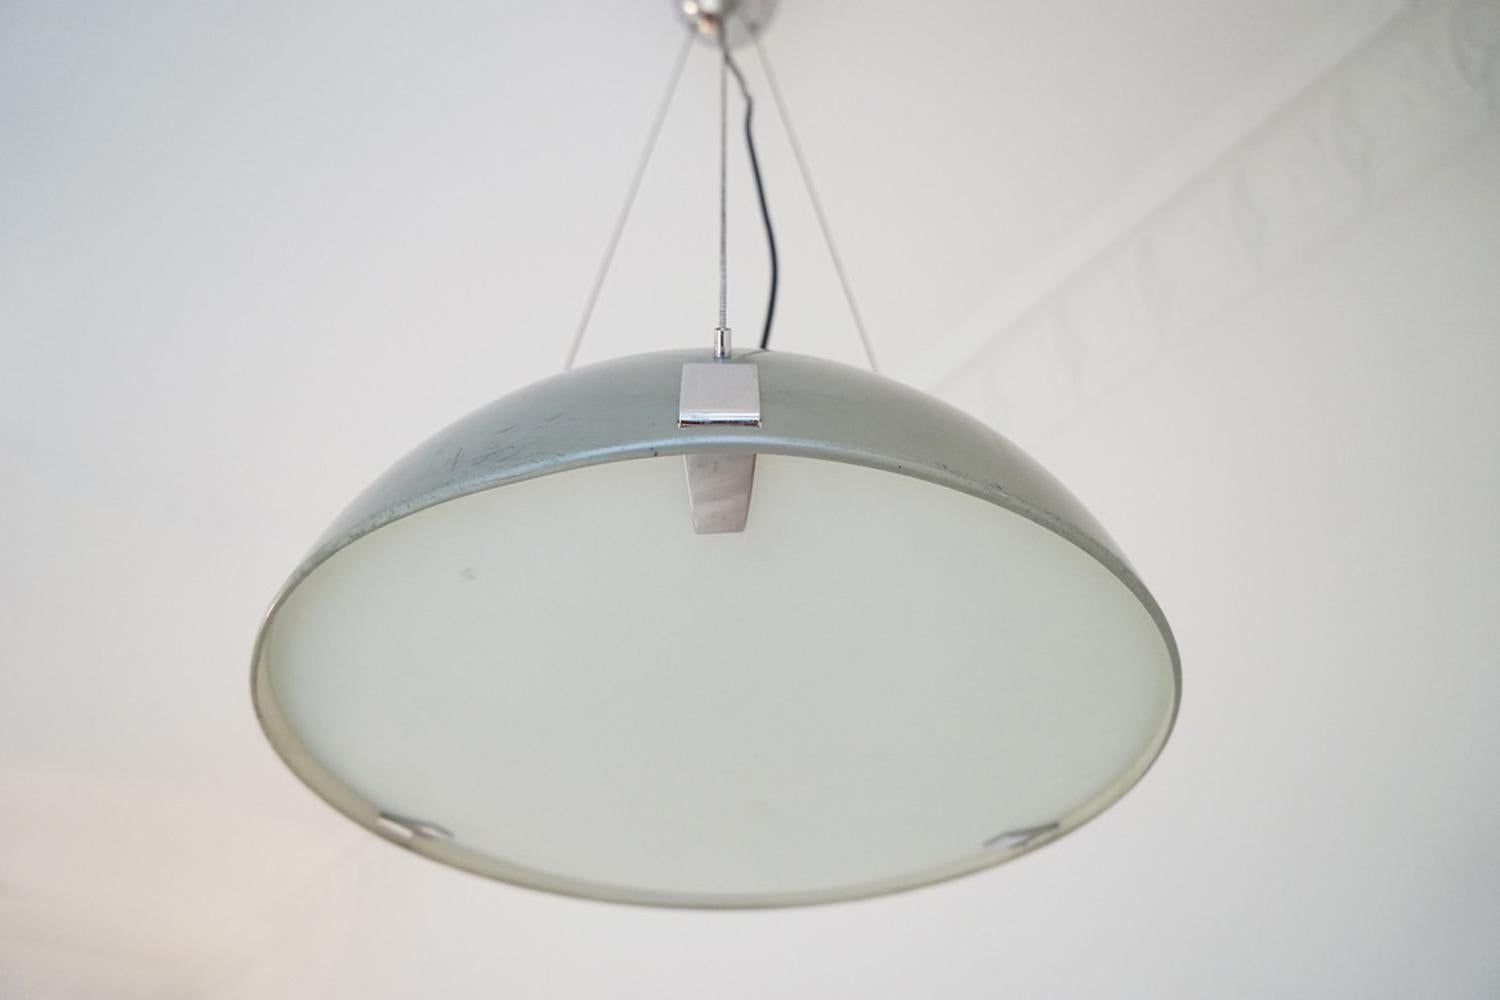 Pendant by Stilnovo, Italy, 1958.

Two lamps available, each 6500 Euros.